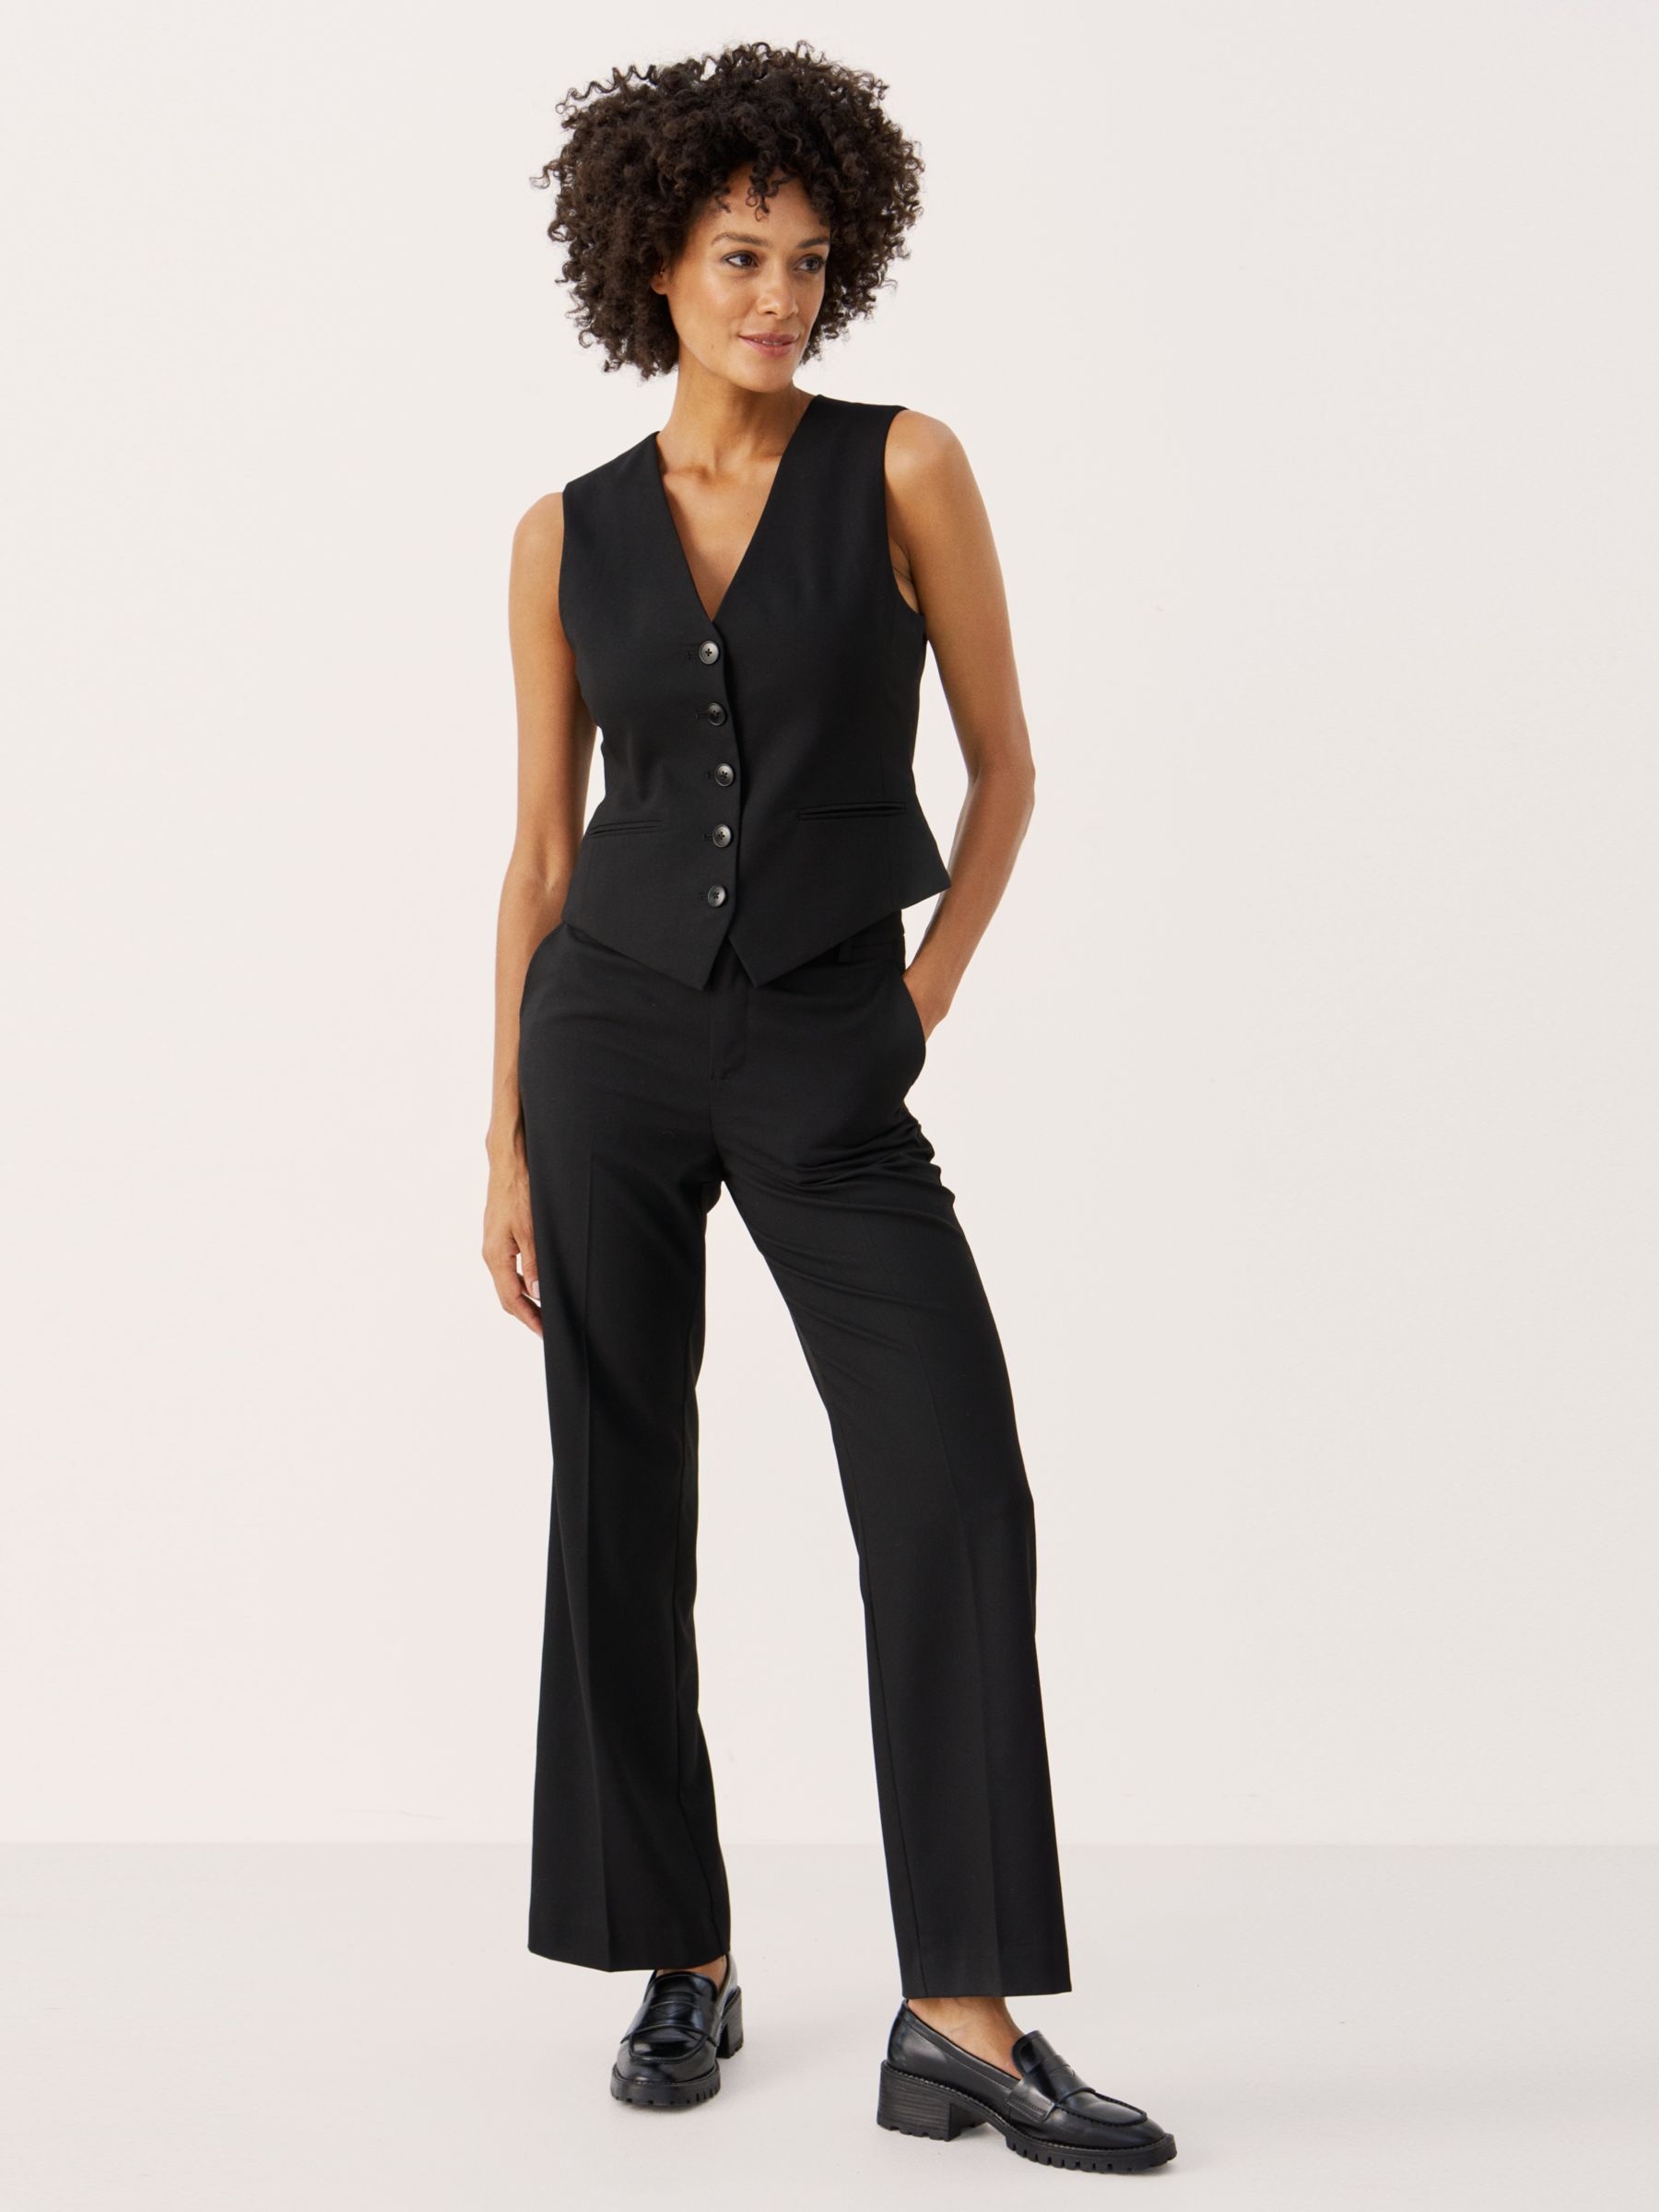 Buy Part Two Rikke Classic Fit Waistcoat, Black Online at johnlewis.com